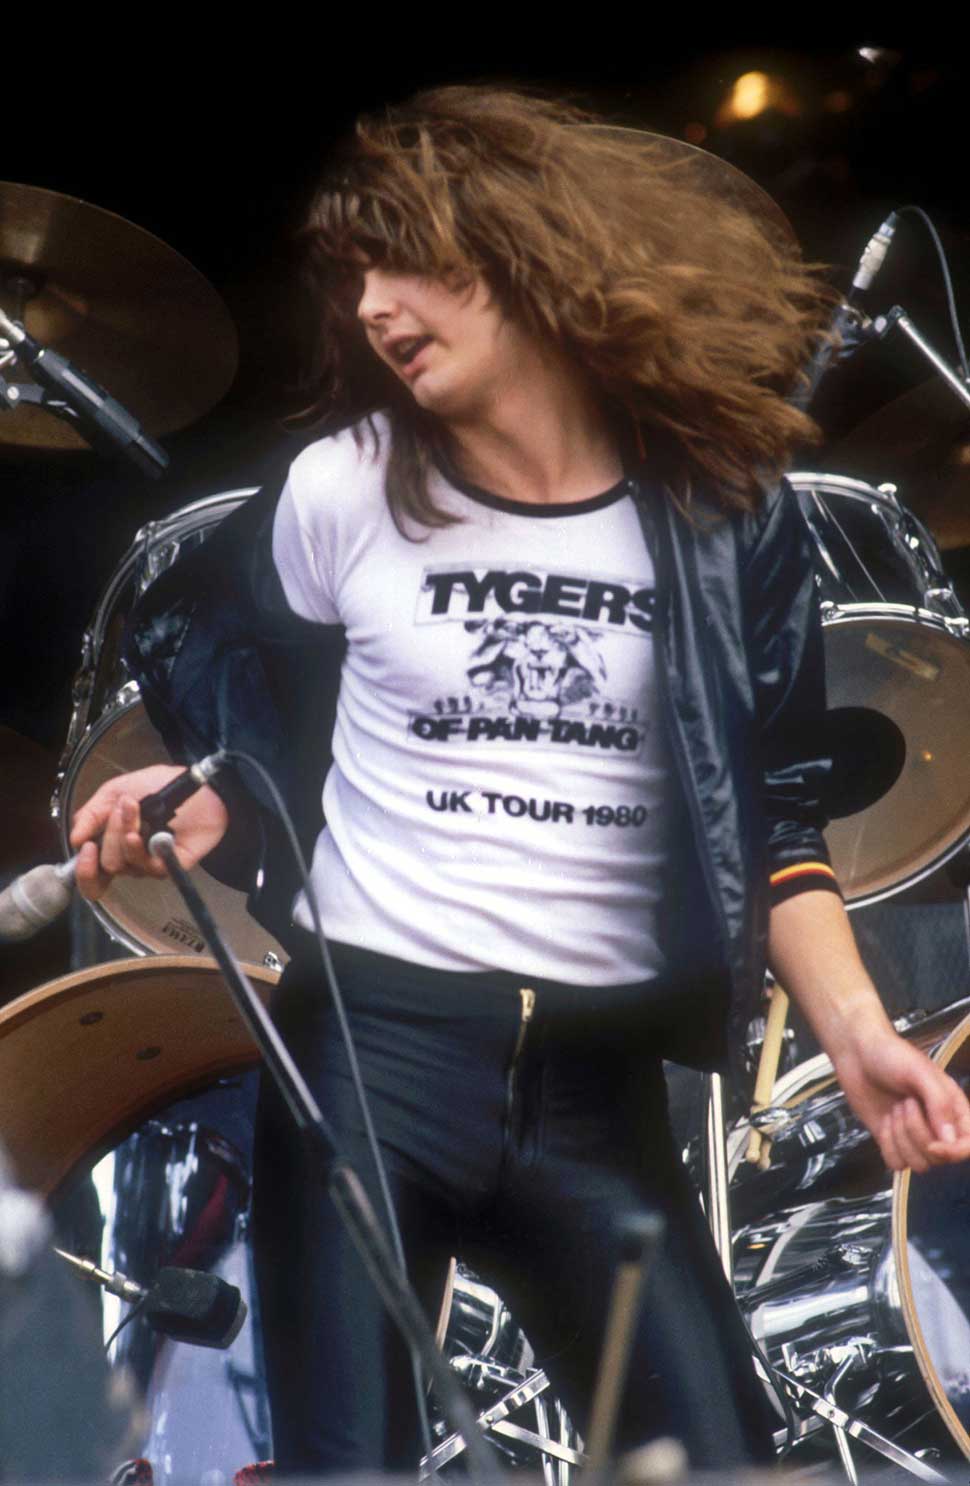 Jess Cox from Tygers Of Pan Tang onstage